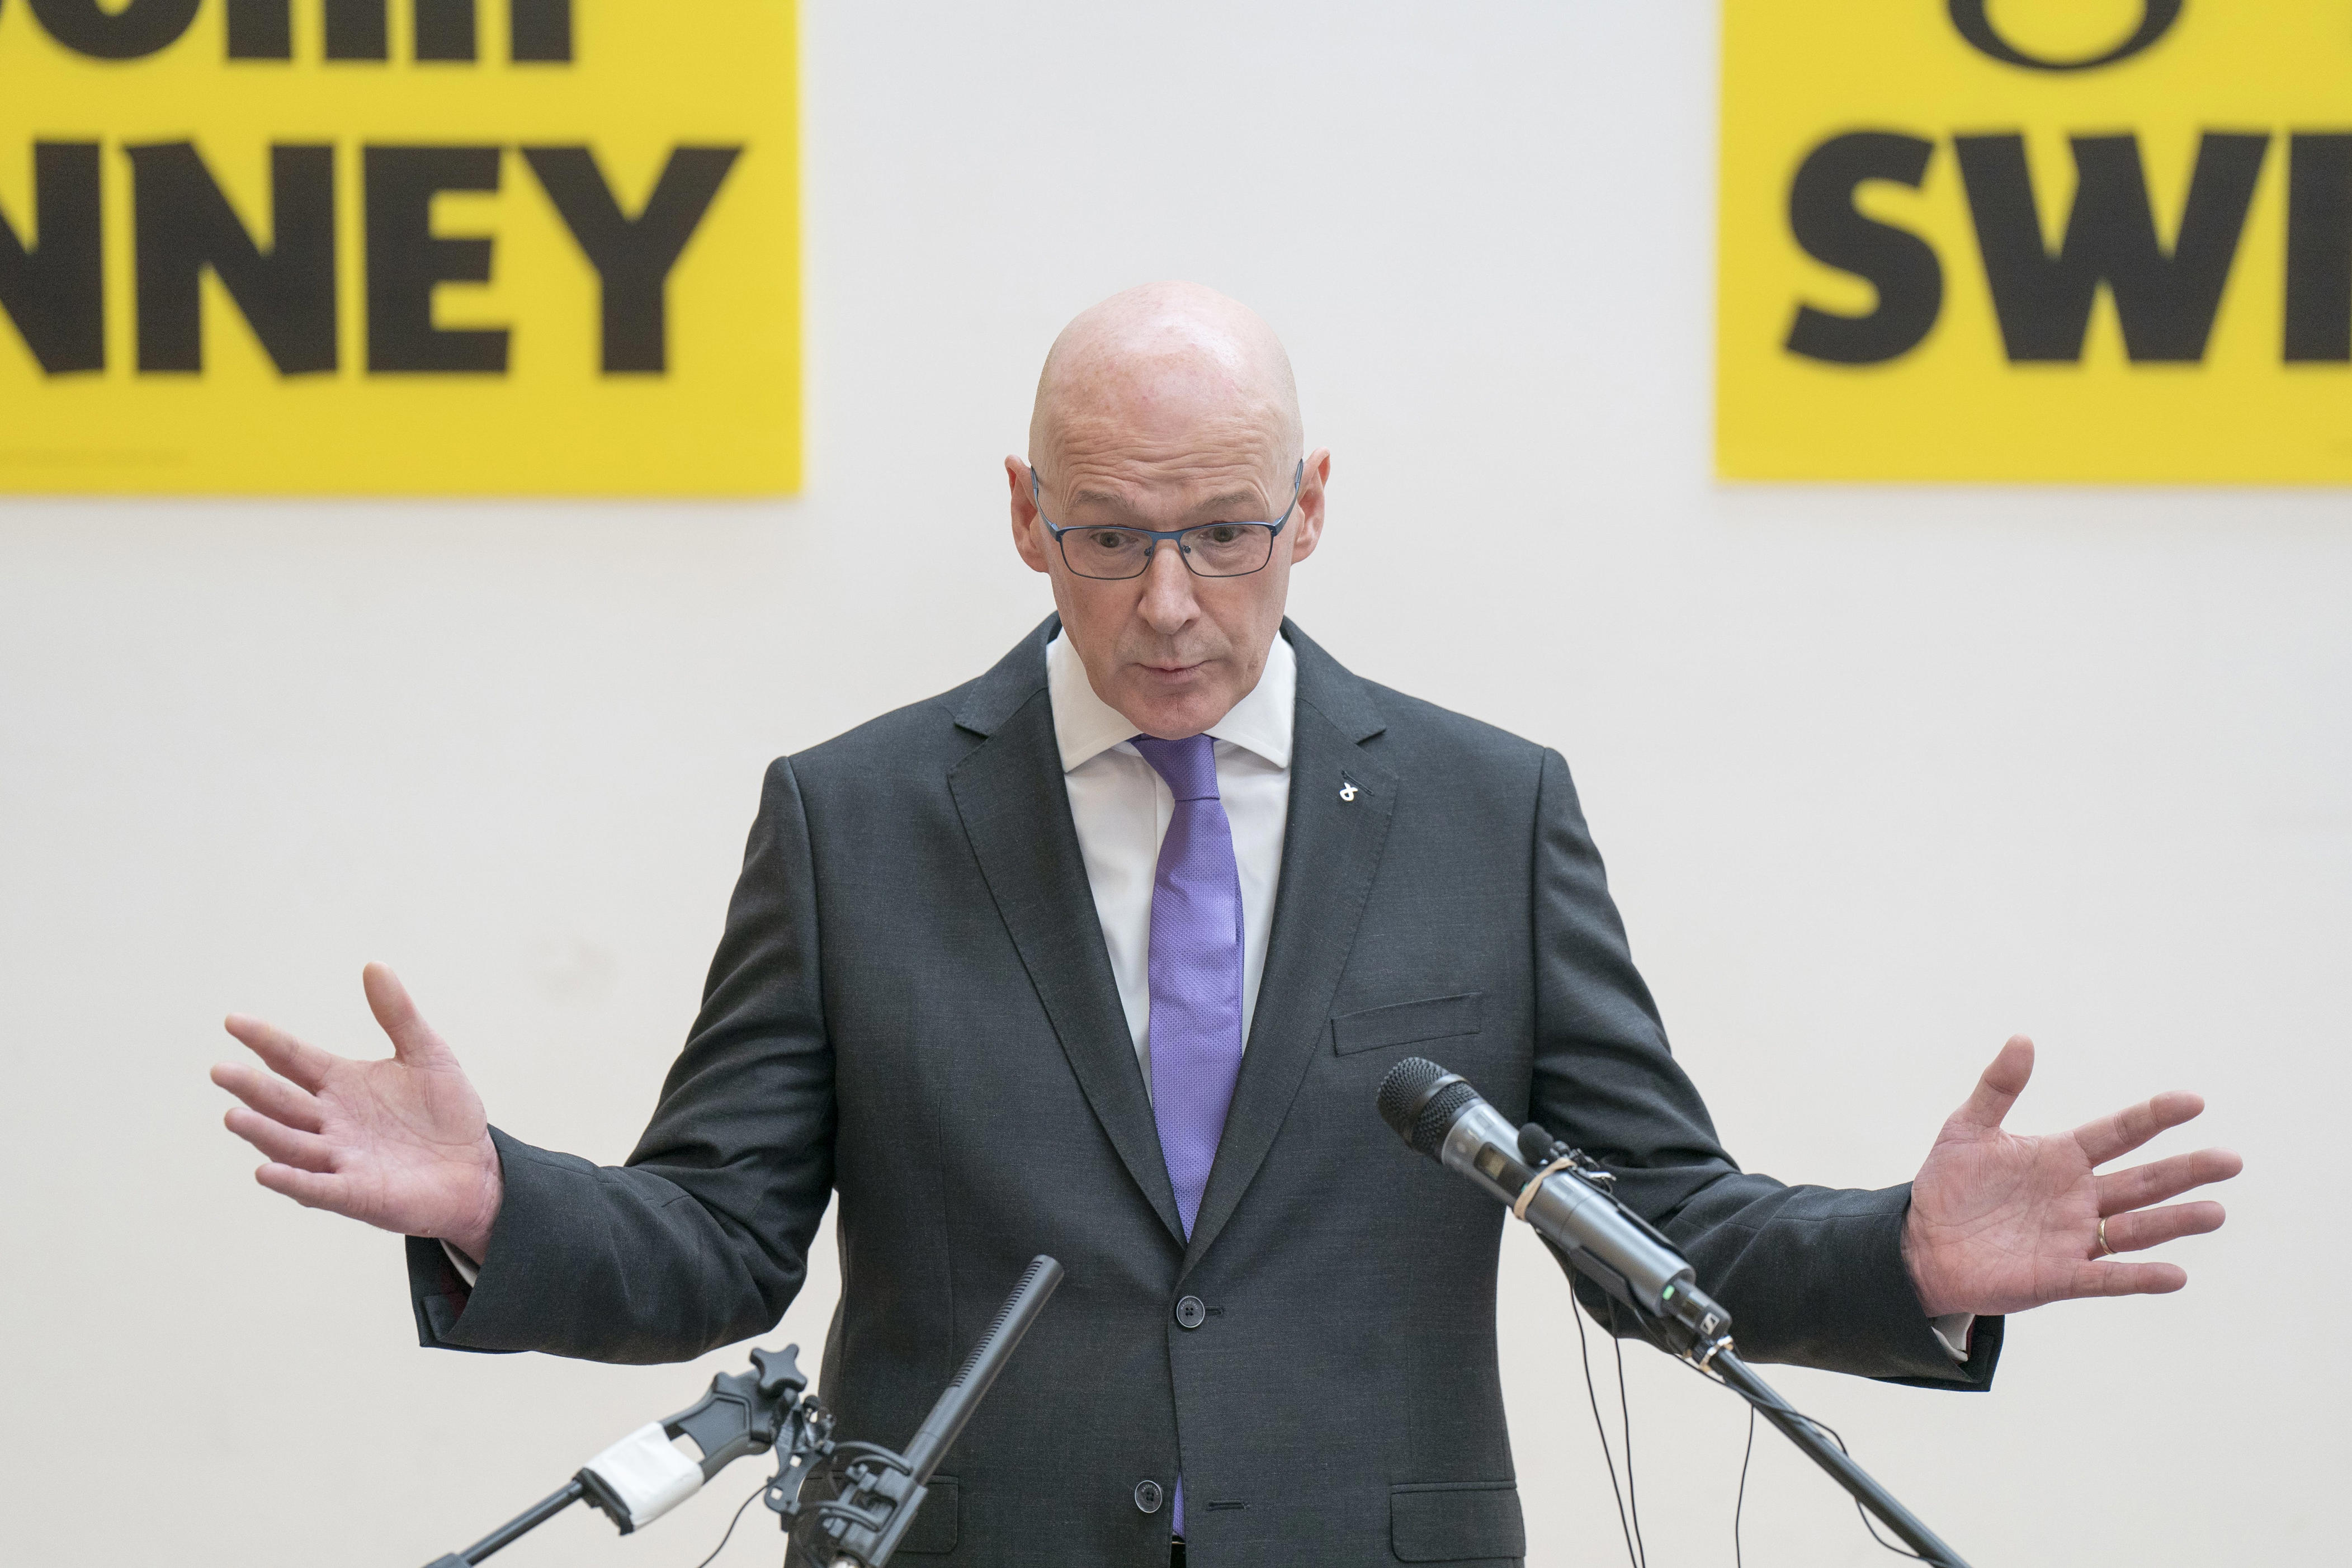 john swinney becomes snp leader and scottish first minister in waiting